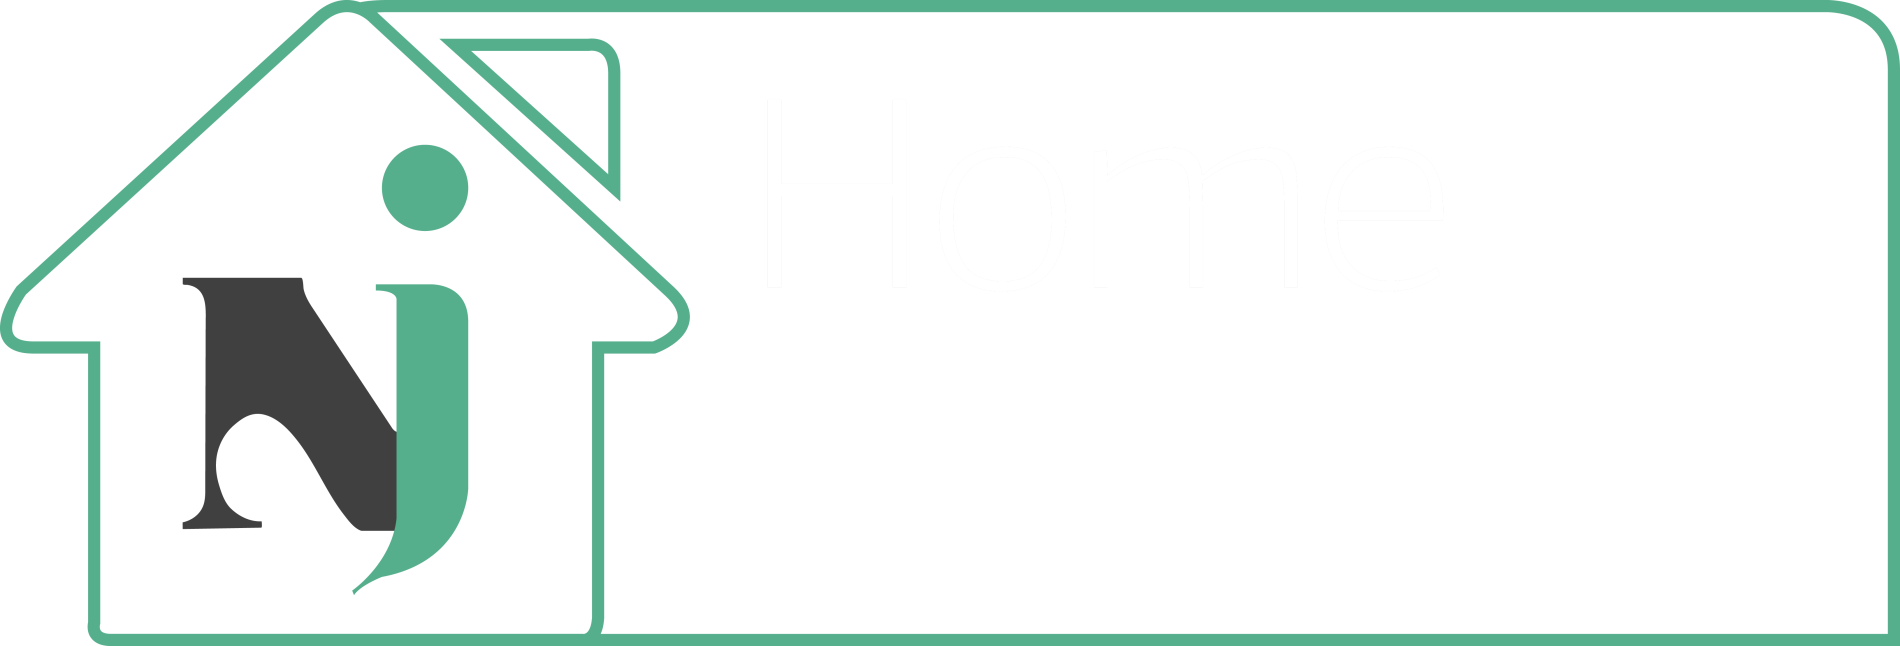 NJ Home Solutions